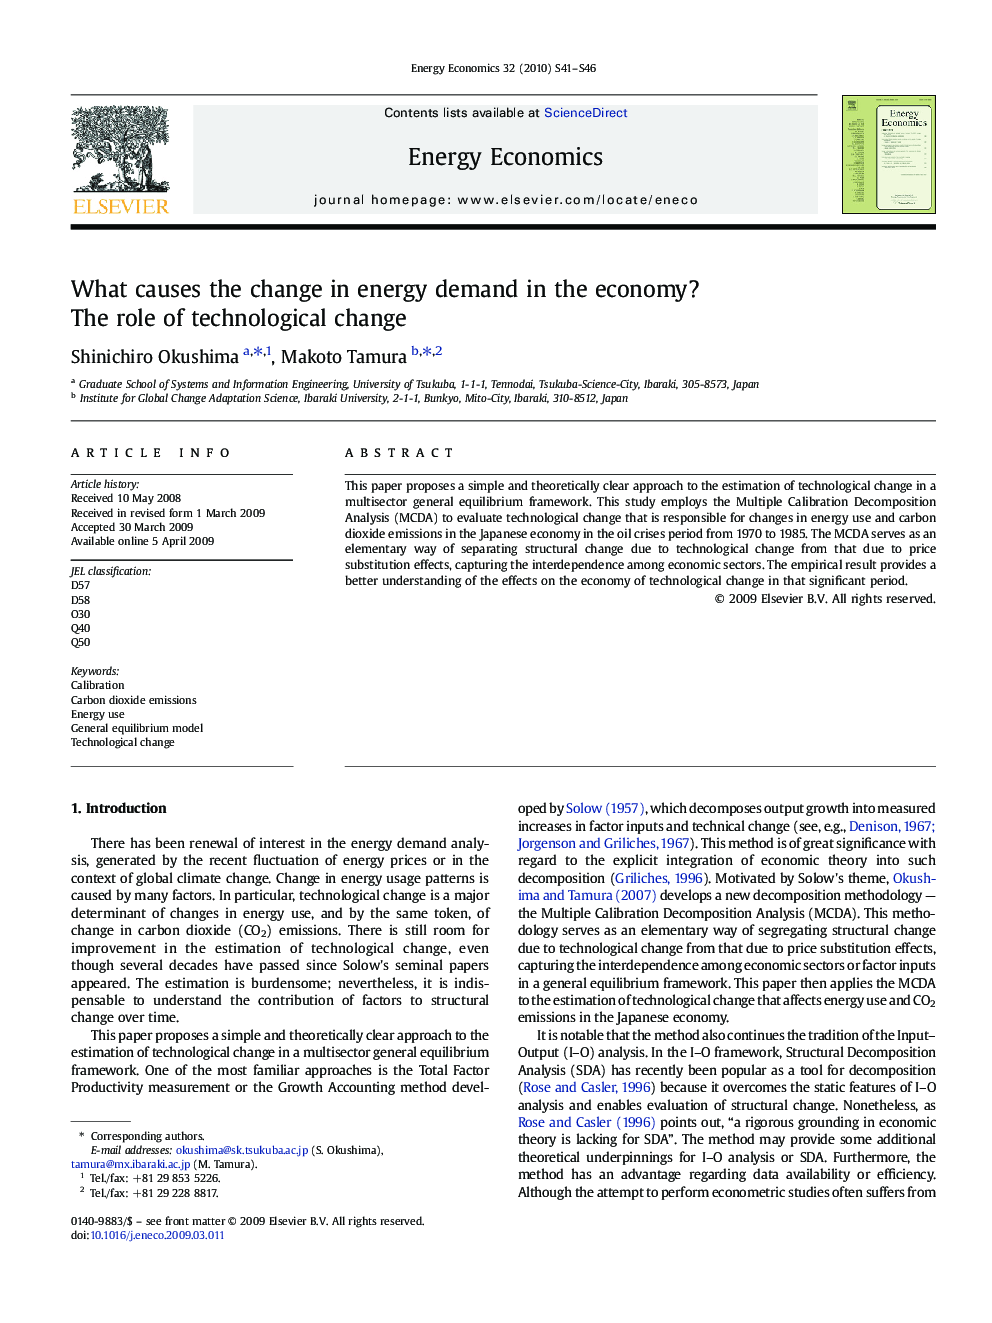 What causes the change in energy demand in the economy?: The role of technological change